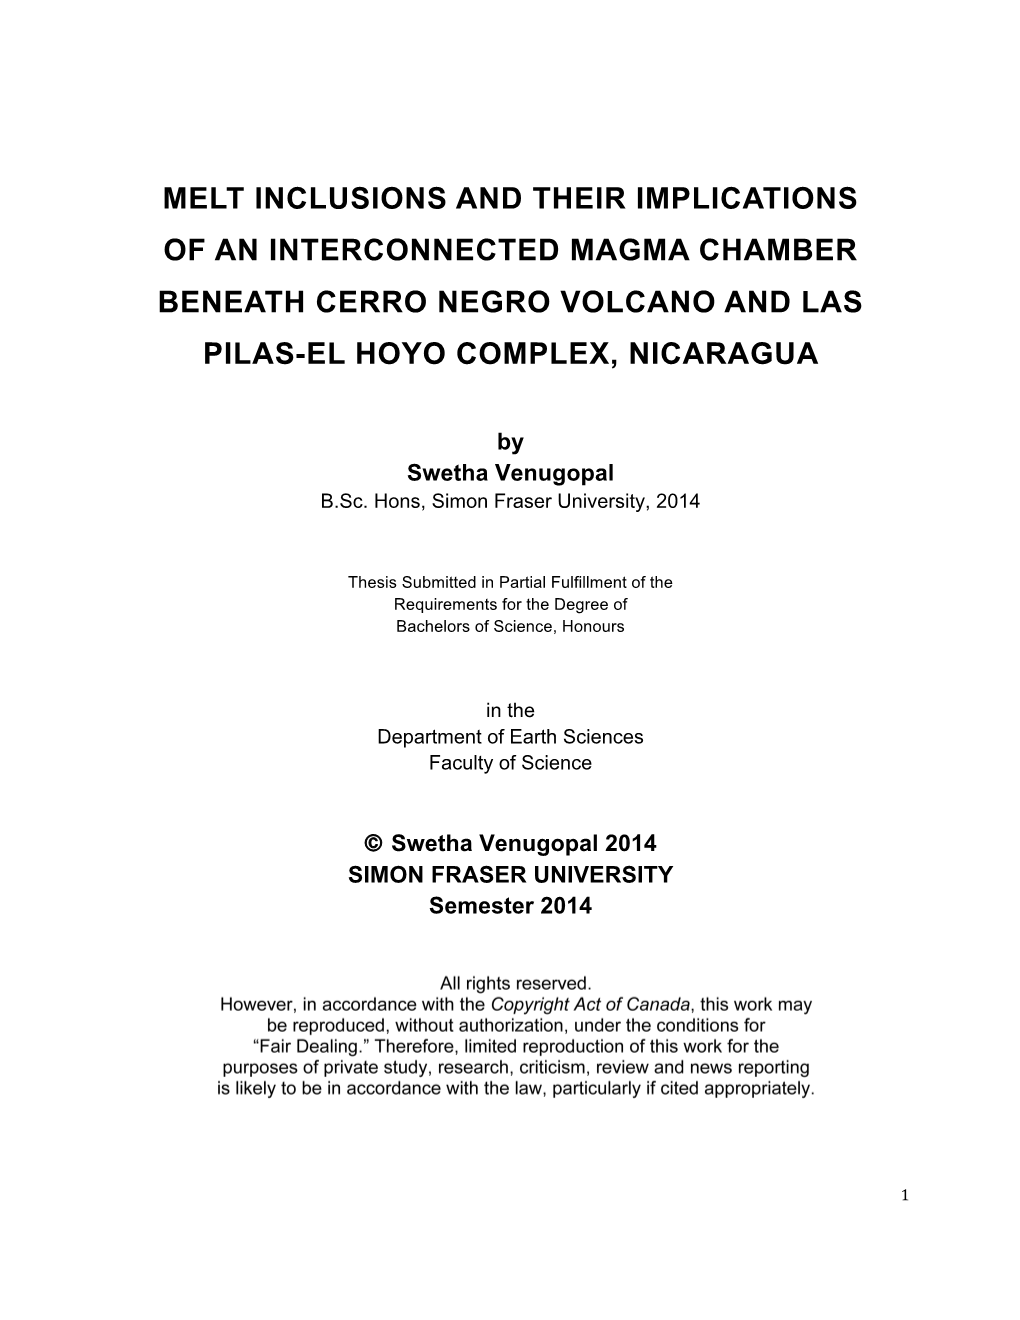 Melt Inclusions and Their Implications of an Interconnected Magma Chamber Beneath Cerro Negro Volcano and Las Pilas-El Hoyo Complex, Nicaragua